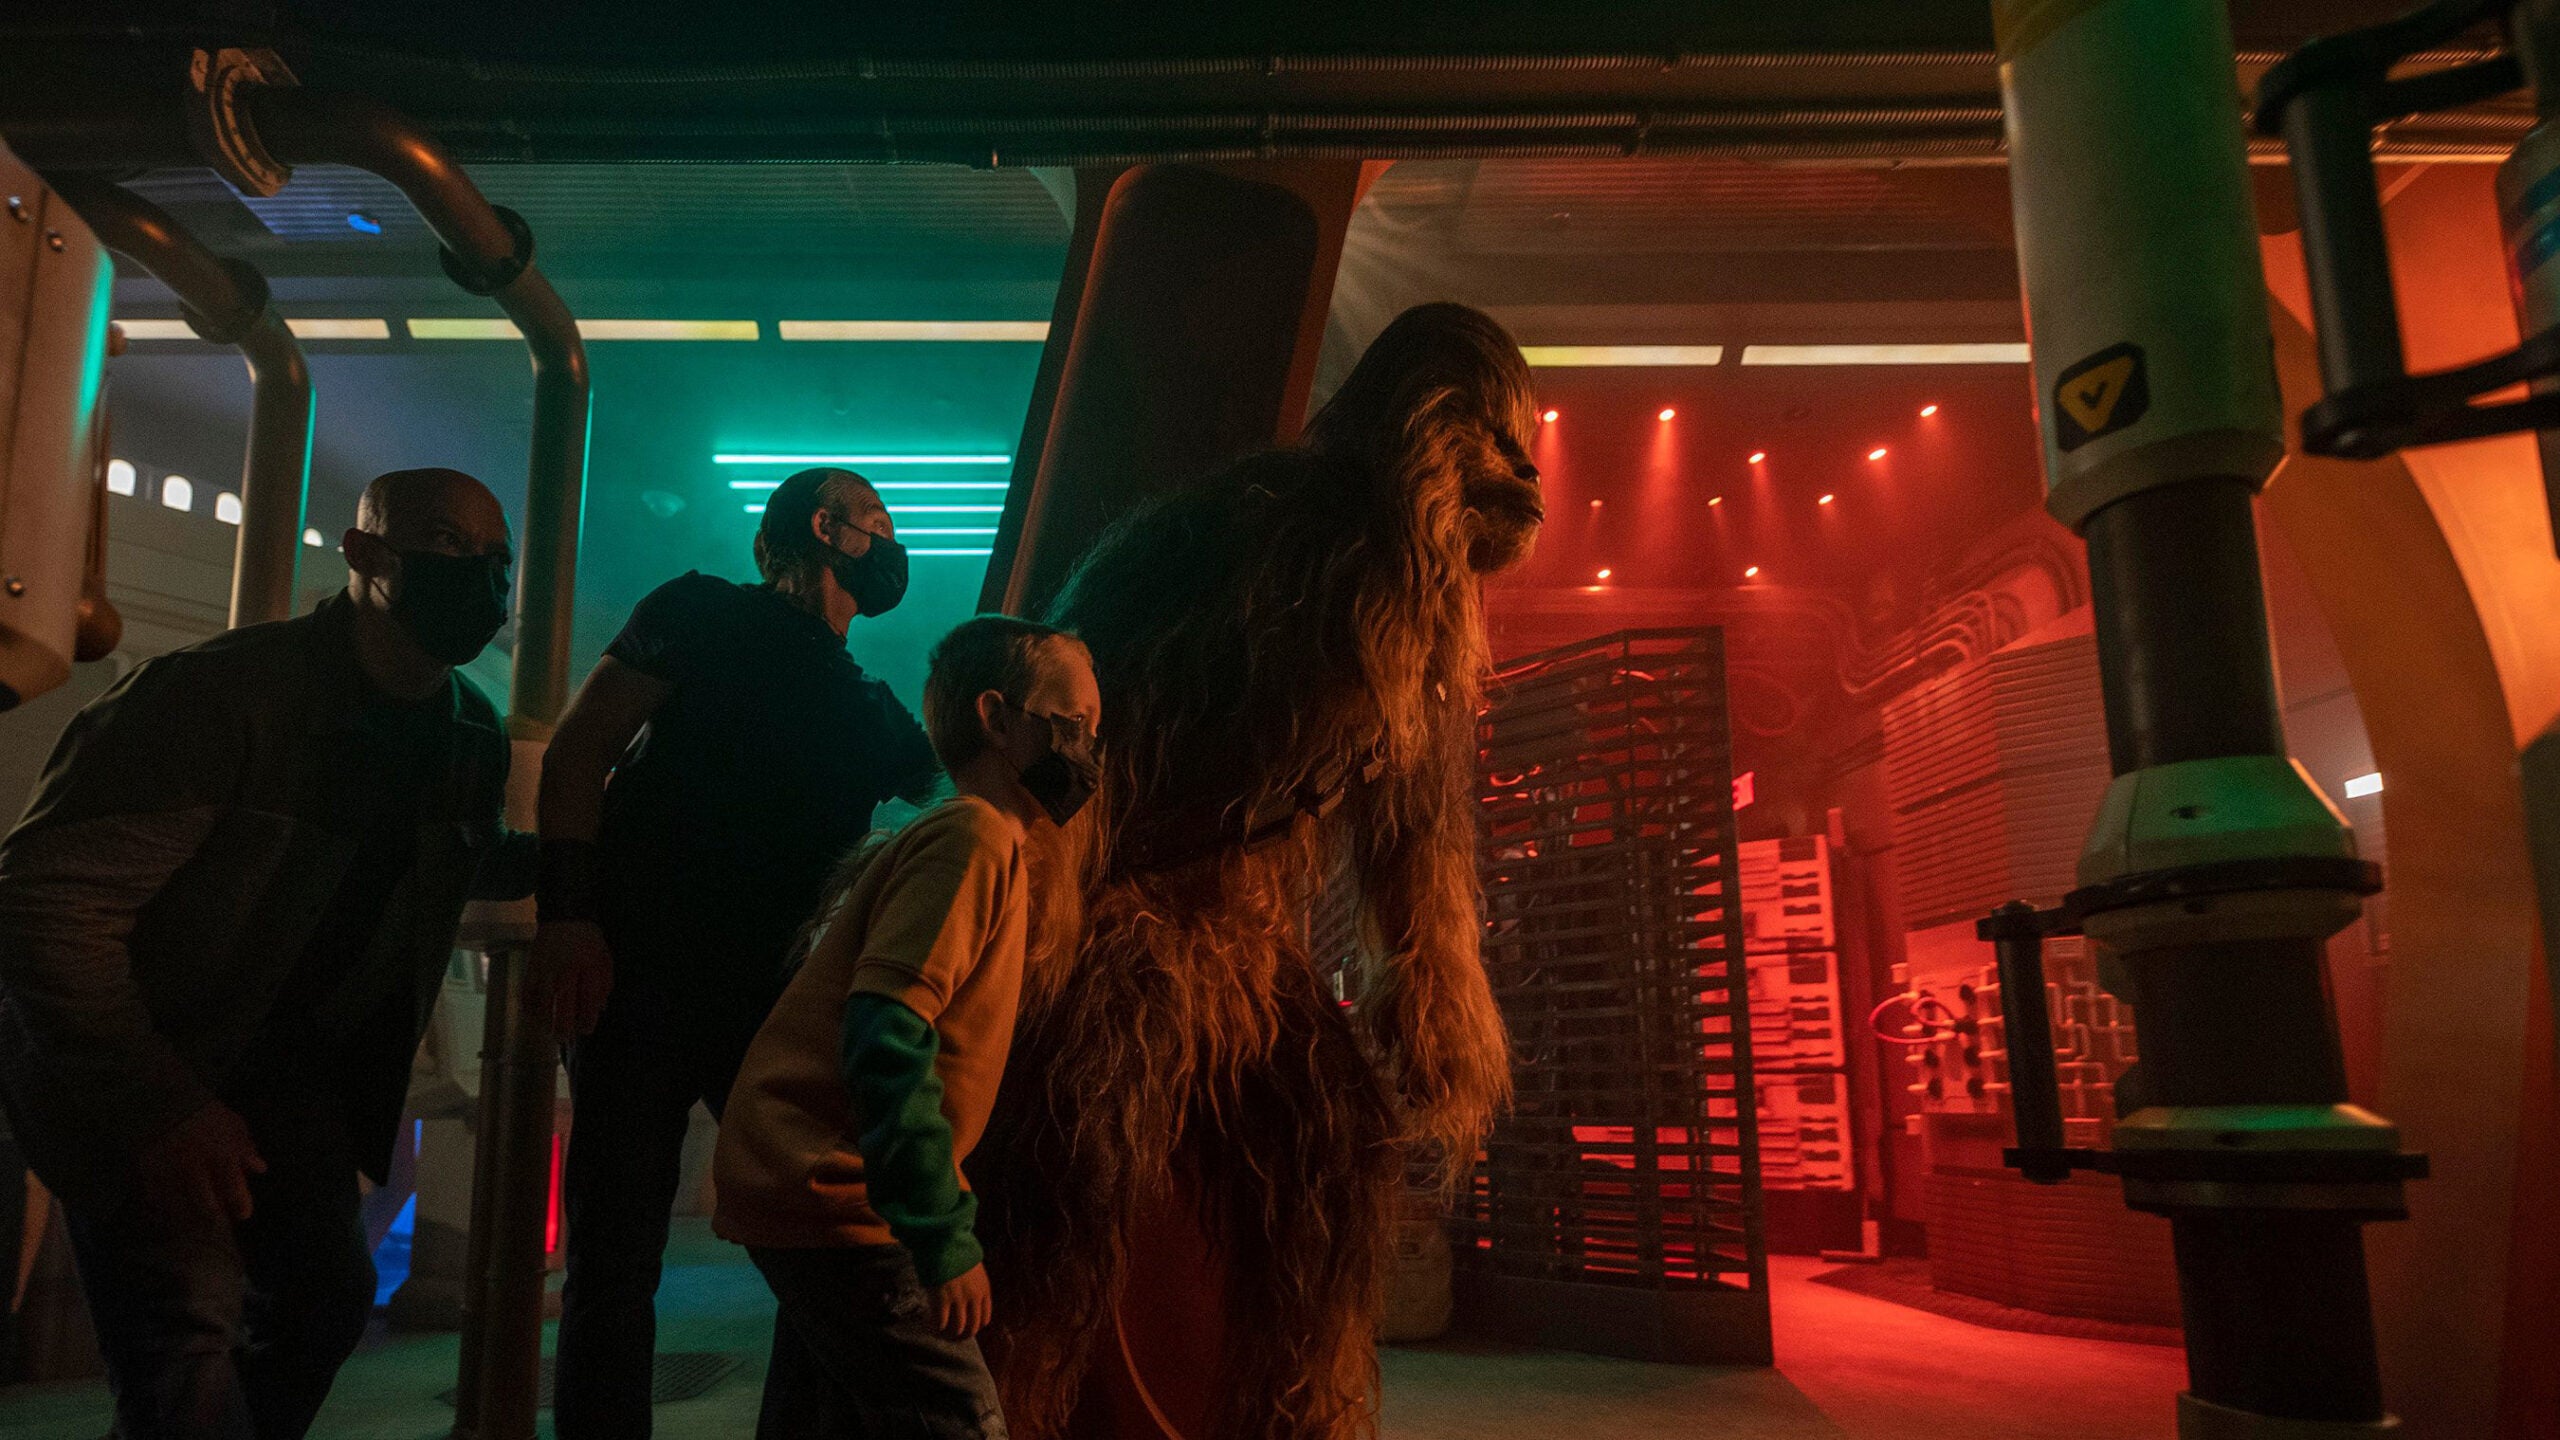 Guests at Disney's Star Wars hotel could interact with Chewbacca.